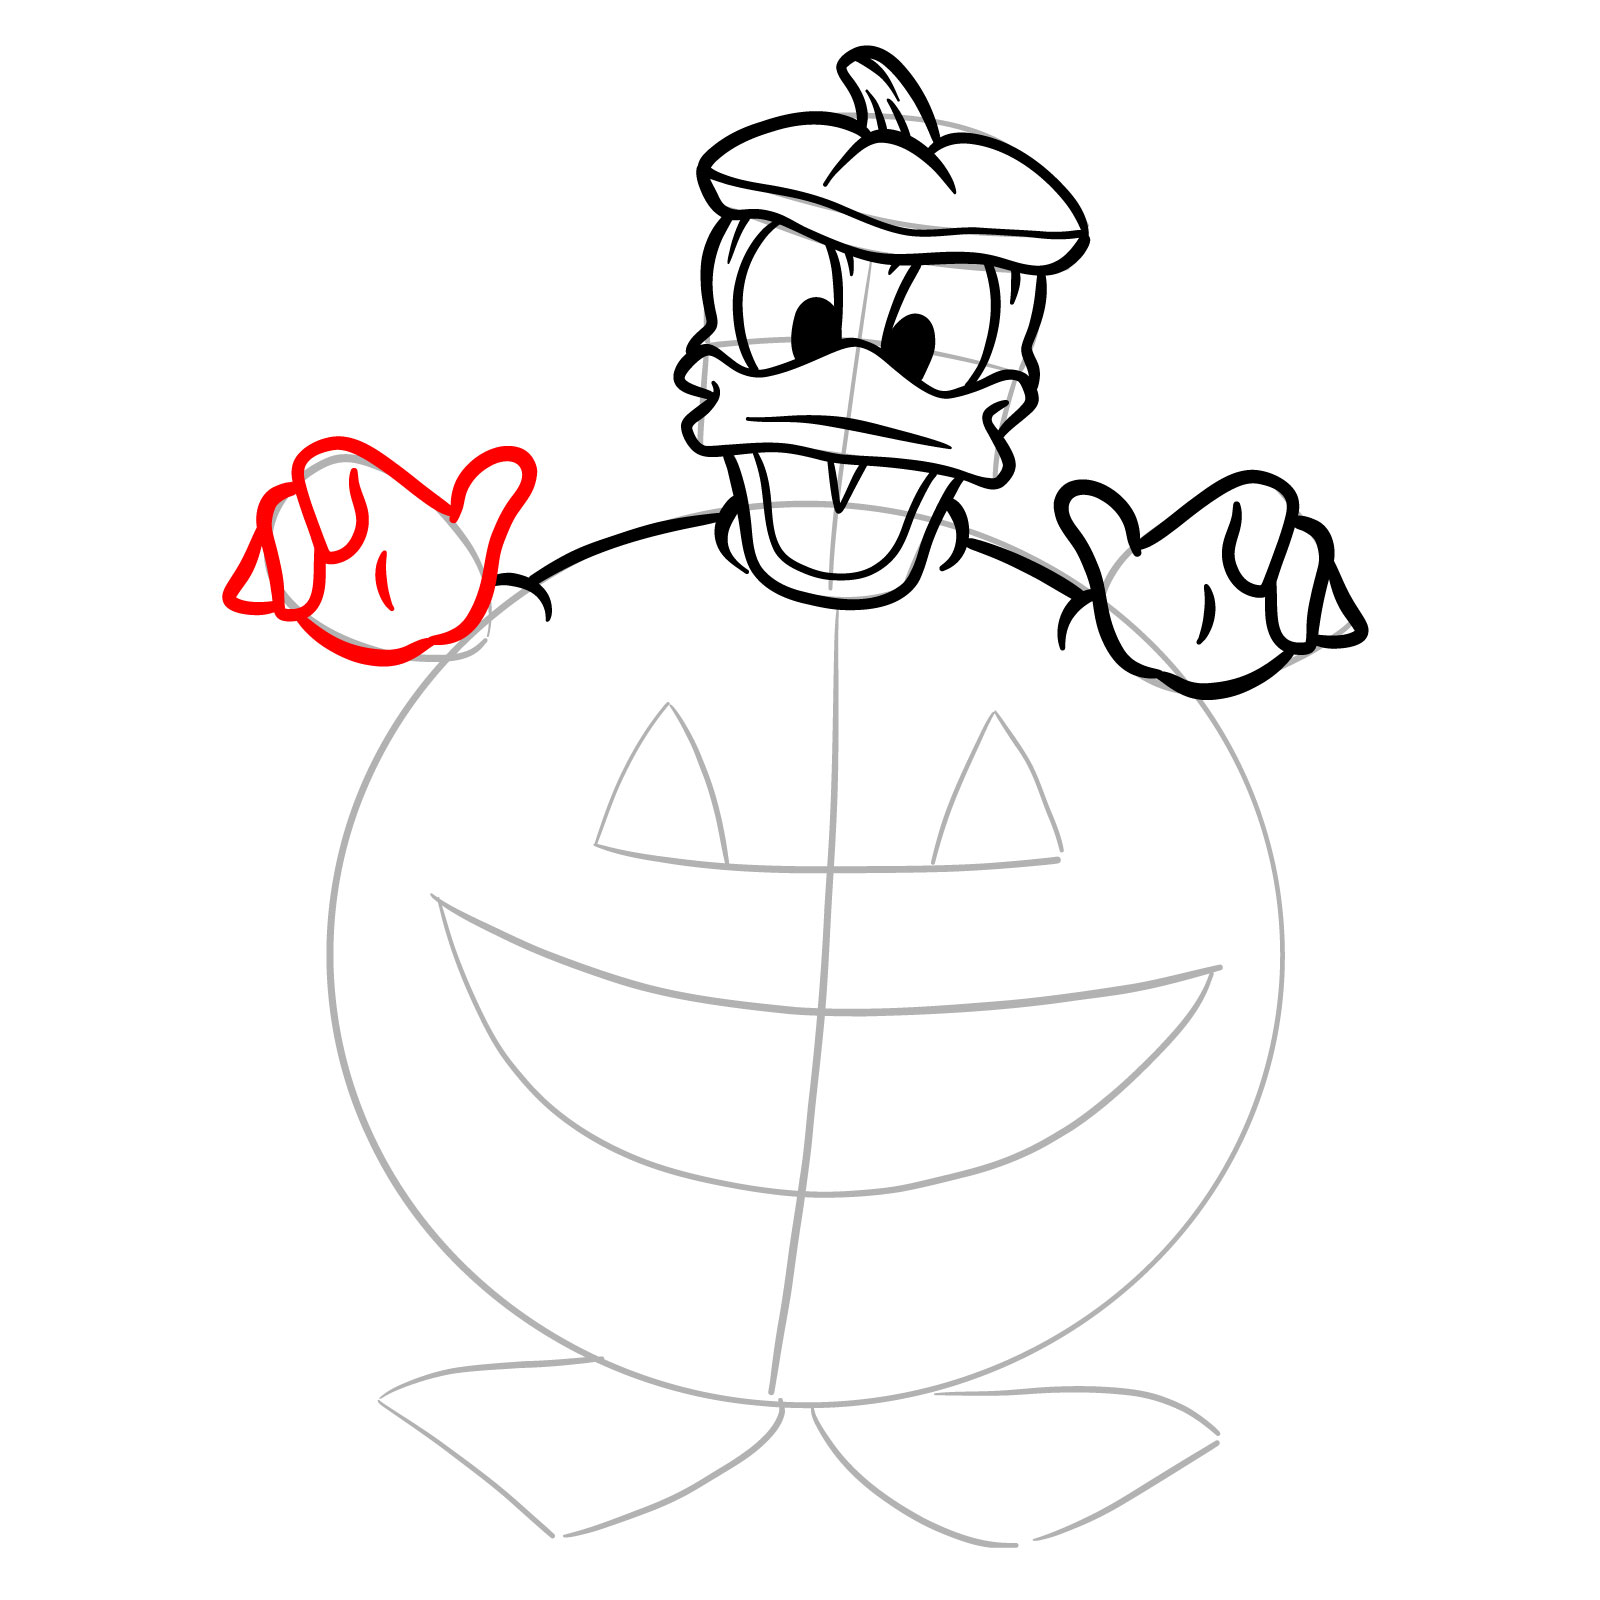 How to draw Halloween Donald Duck in a jack o'lantern - step 16